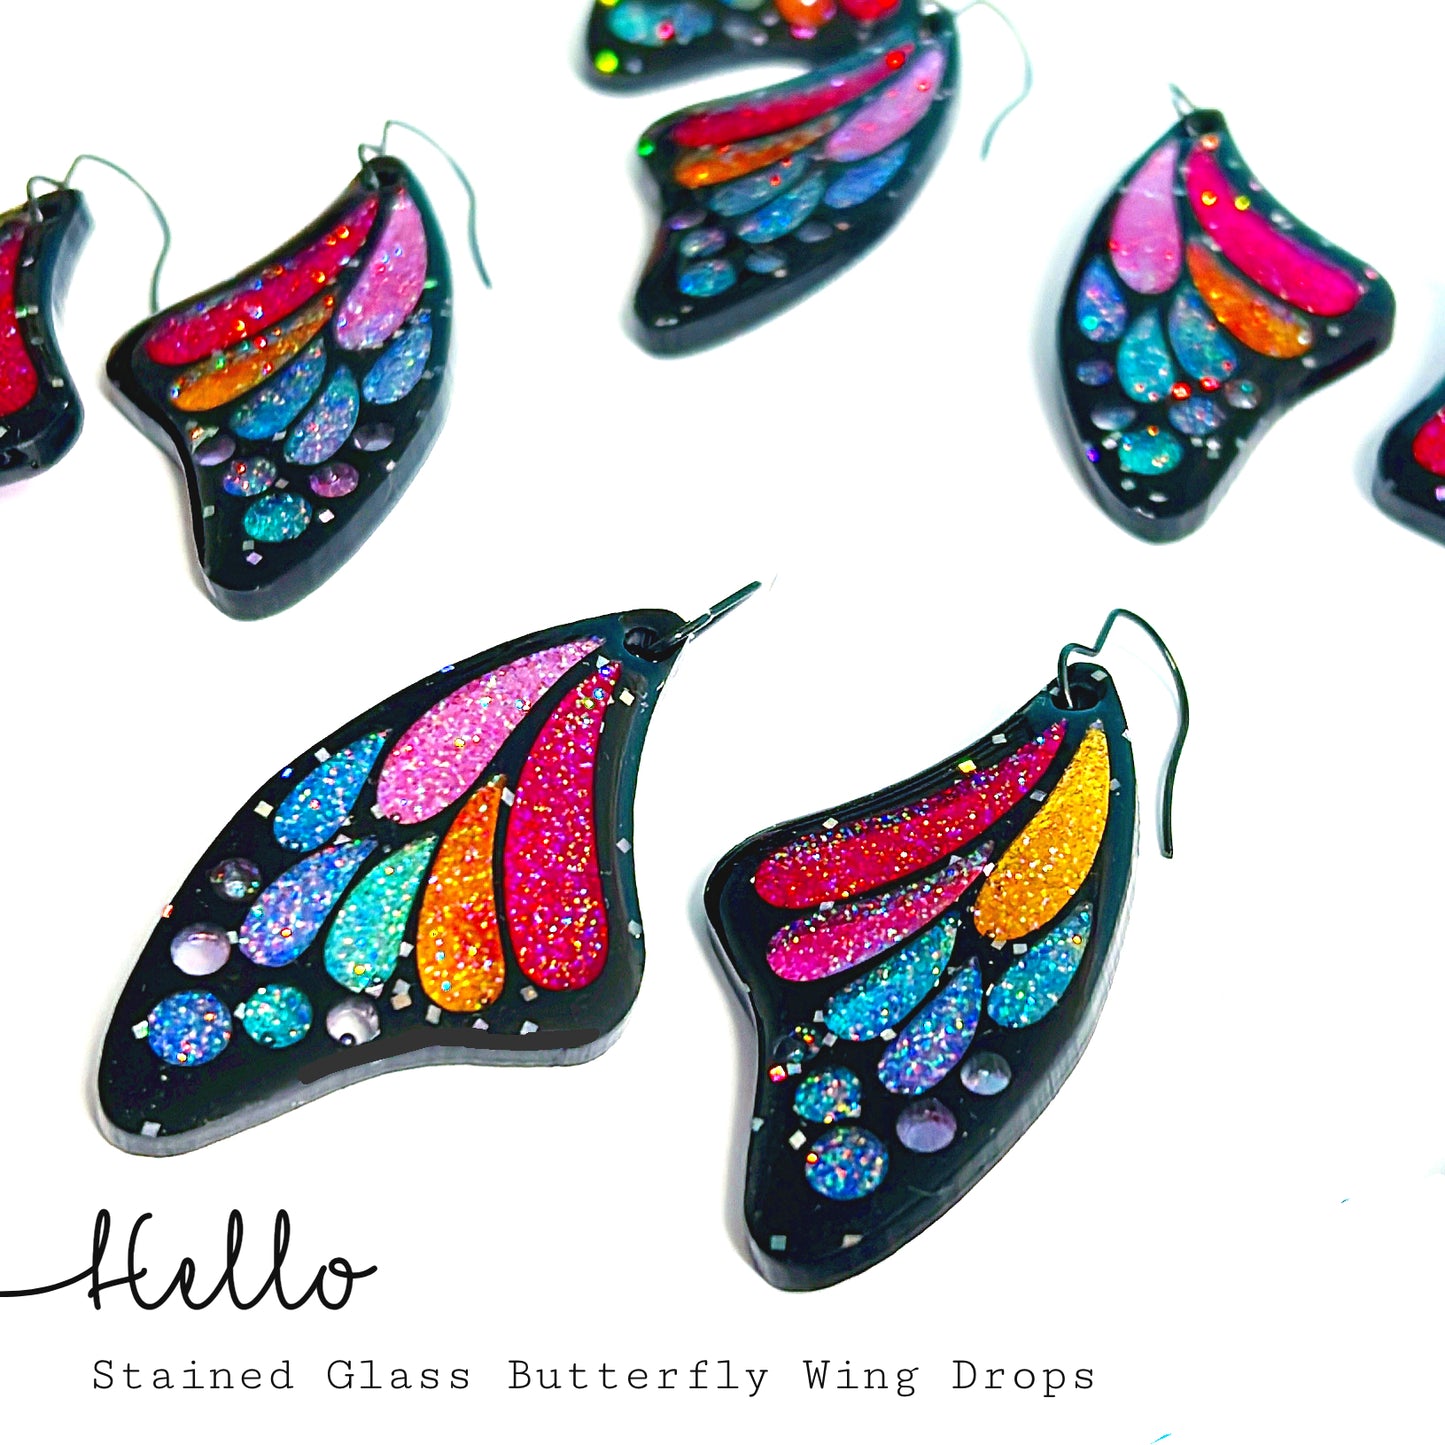 STAINED GLASS BUTTERFLY WINGS : RAINBOW : Handmade Holographic Resin DROP Earrings